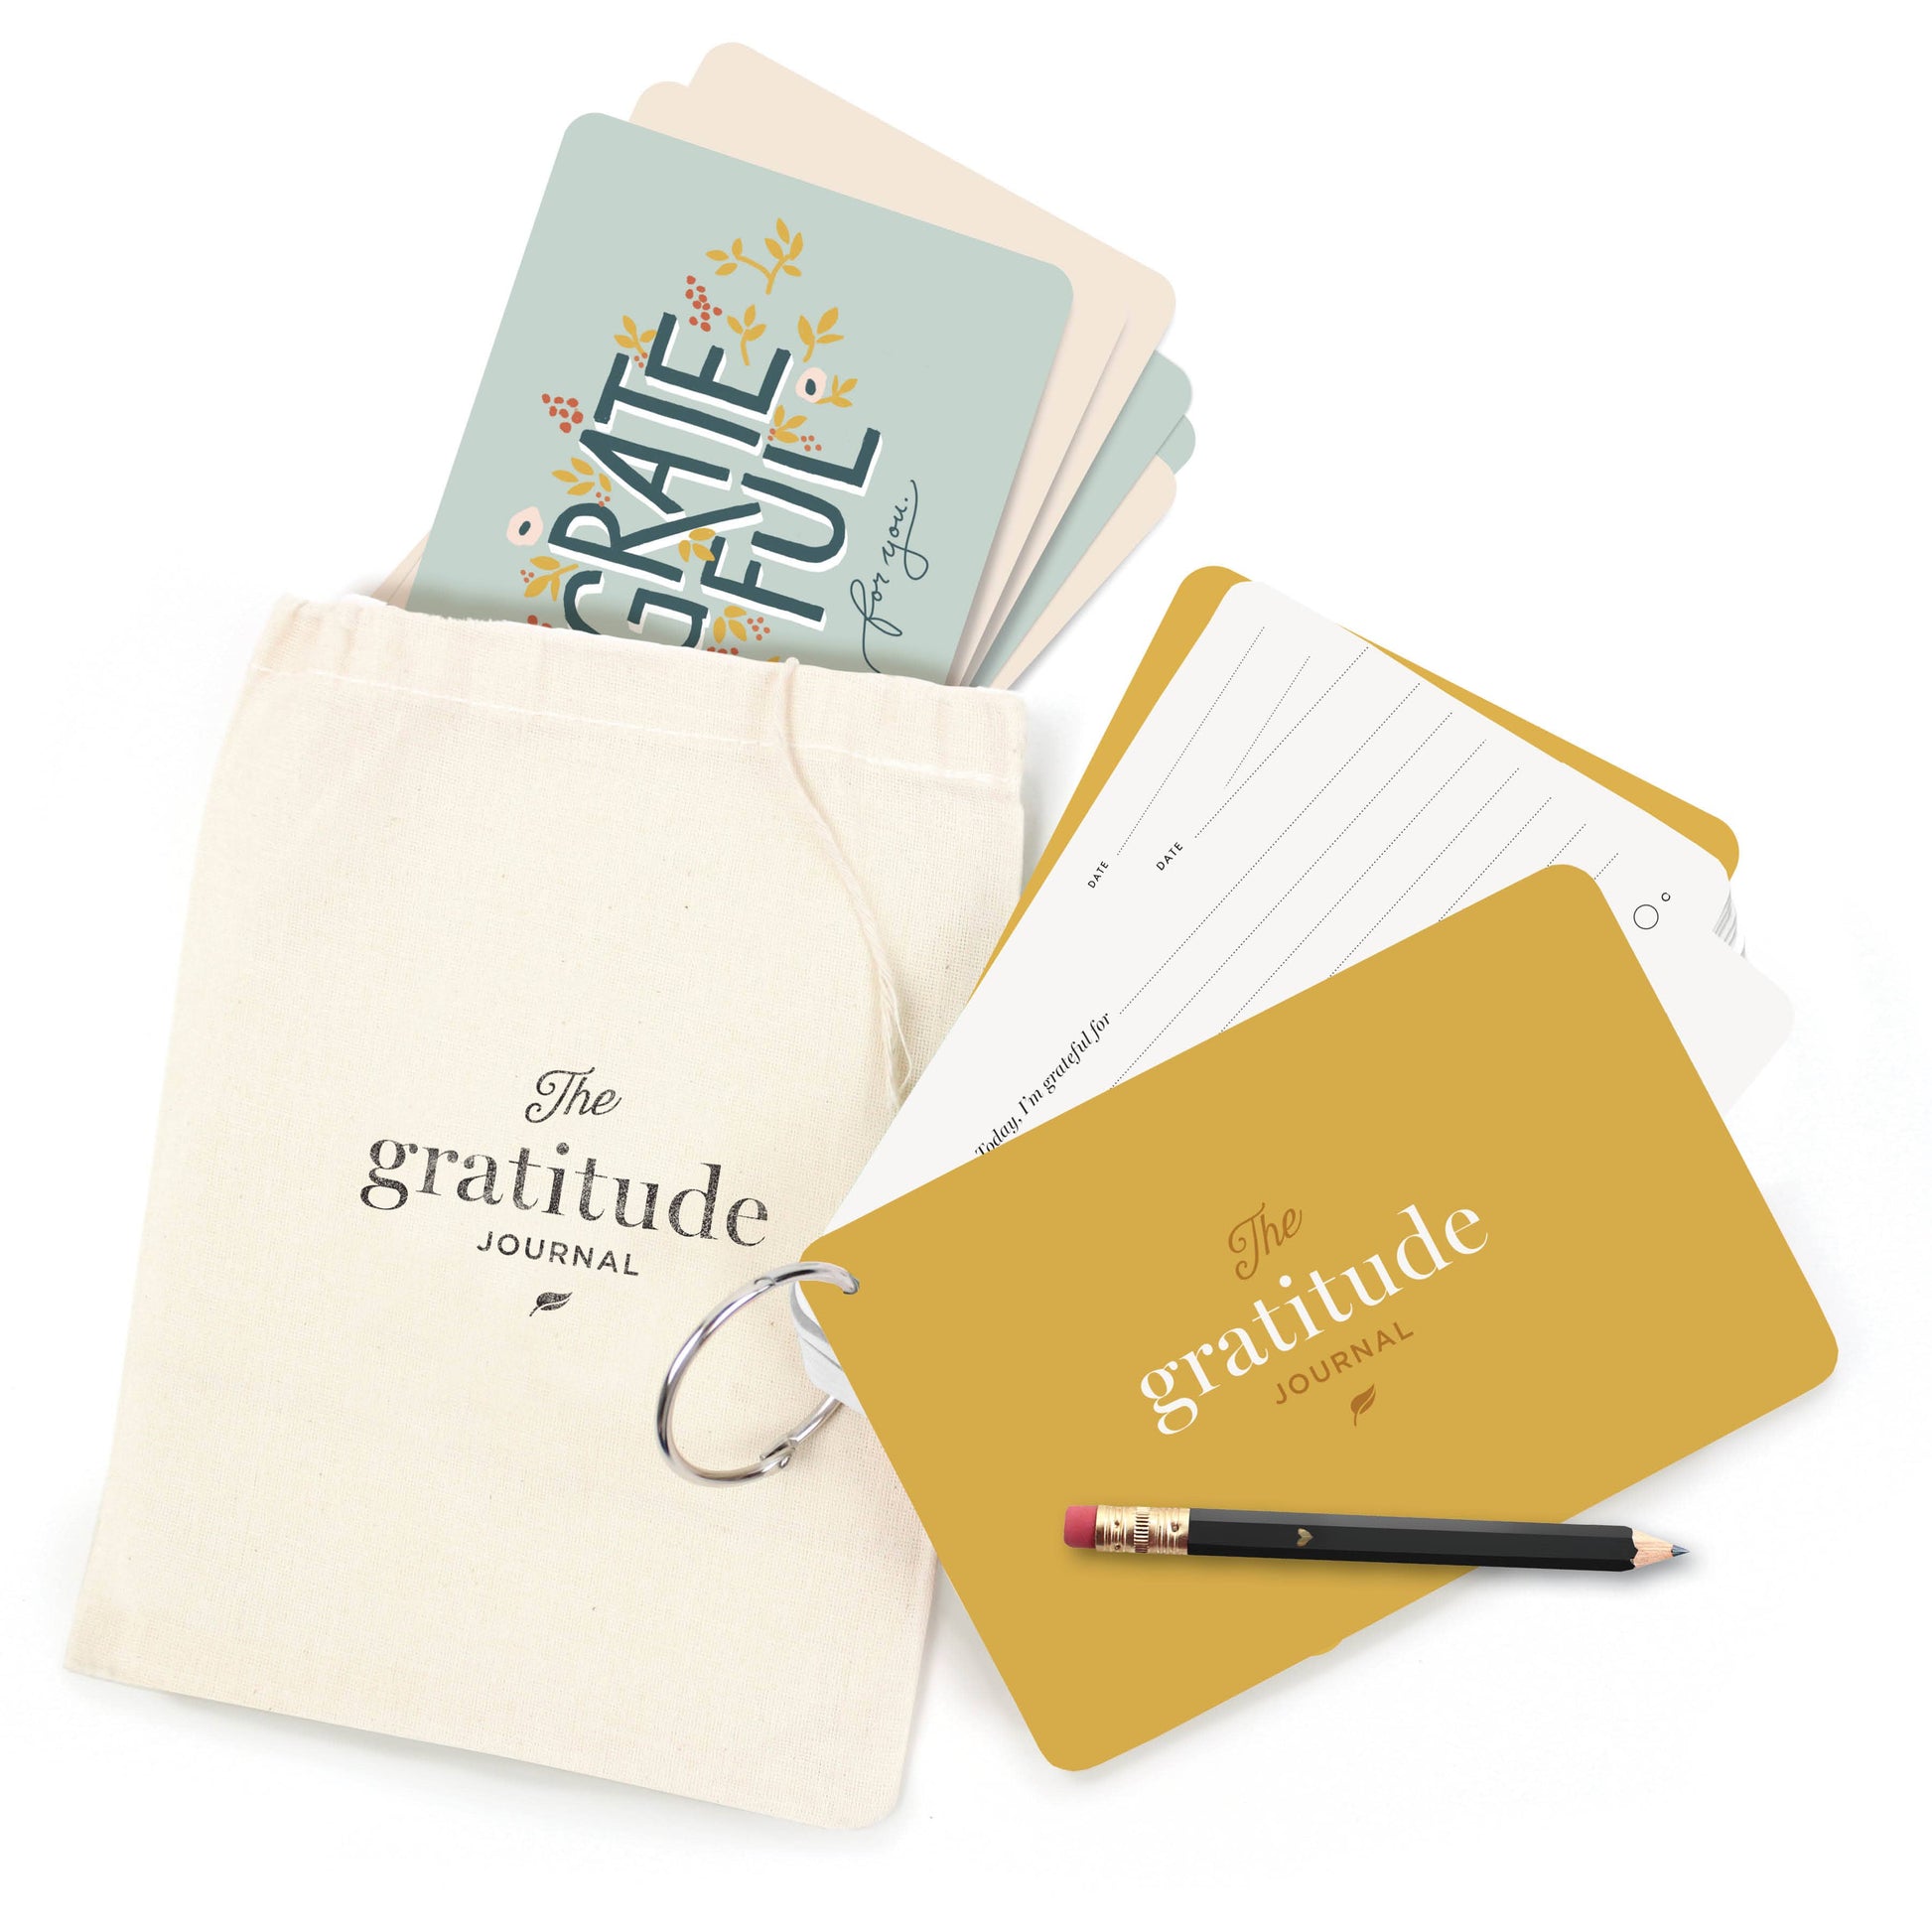 Card stock bound by a ring. The cover says "The Gratitude Journal". Accompanied by a small canvas bag to hold the journal and cards with the words "Grateful" on the back.